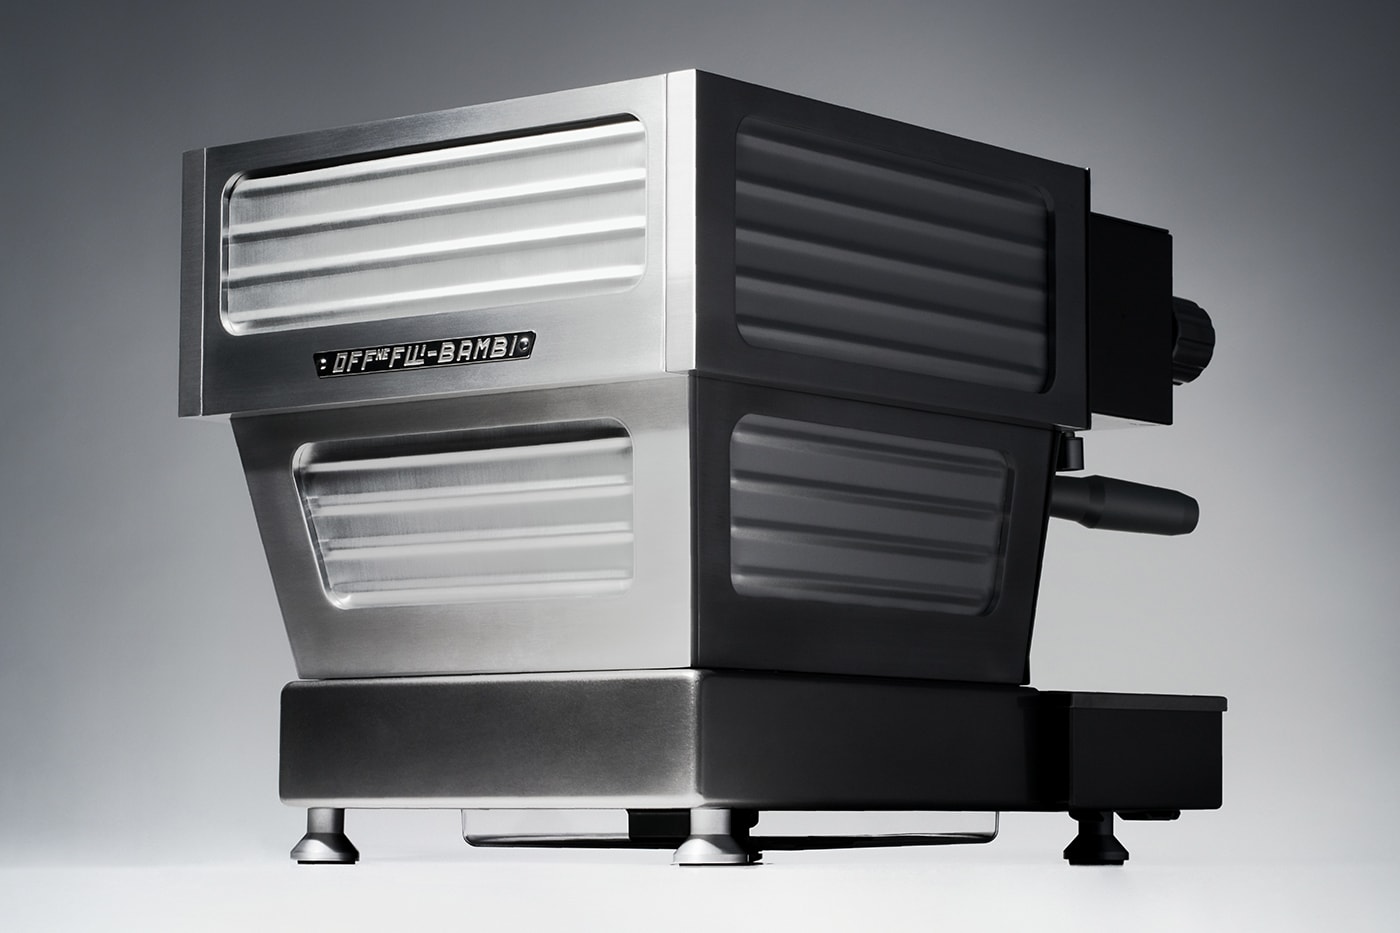 RIMOWA Joins Forces With La Marzocco for a Limited-Edition Espresso Machine aluminium crafstmanship italian engineering